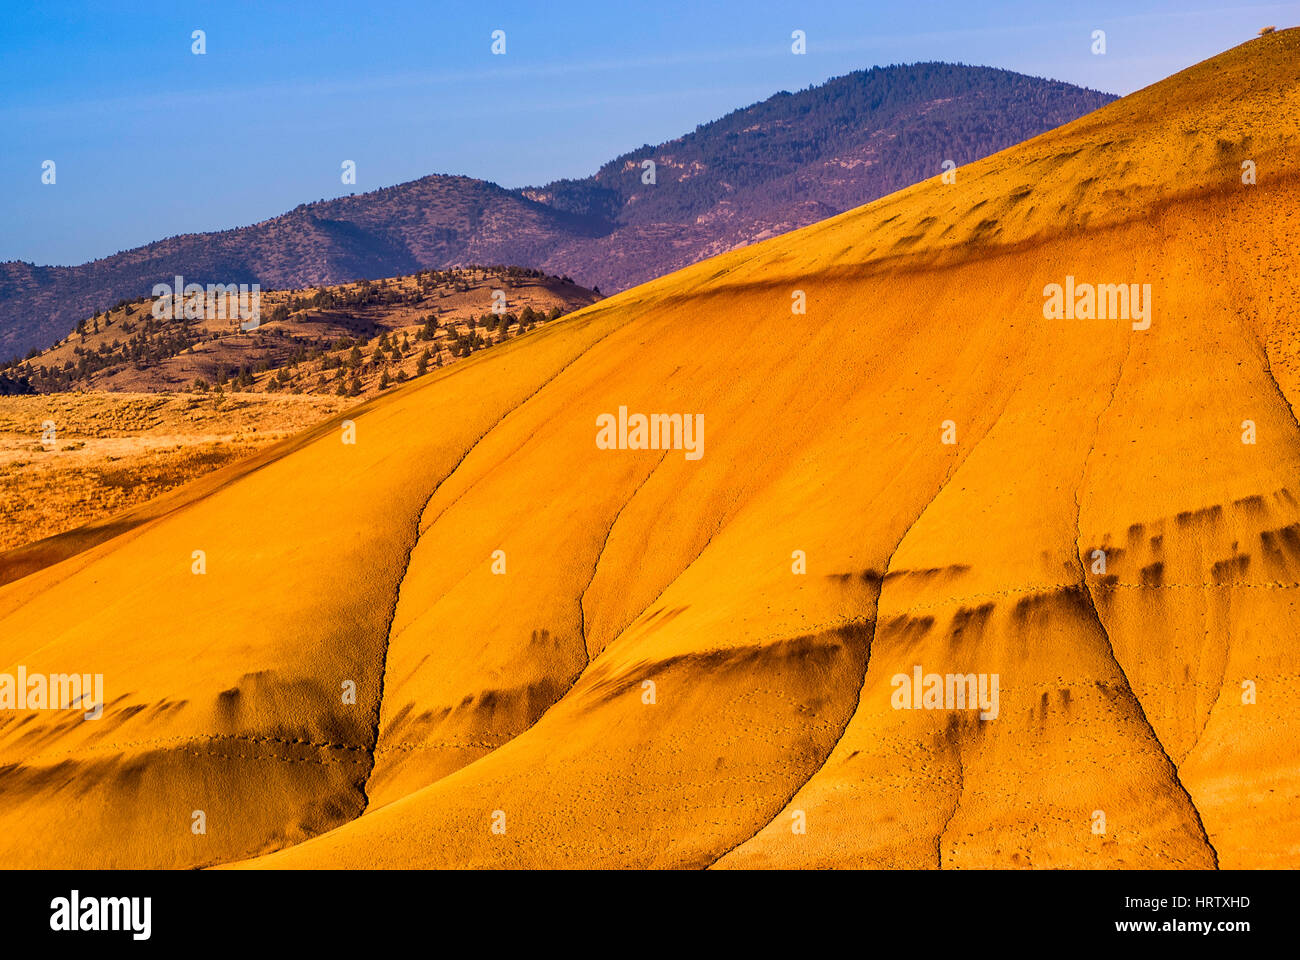 Painted Hills at John Day Fossil Beds National Monument, Painted Hills Unit, Oregon, USA Stockfoto